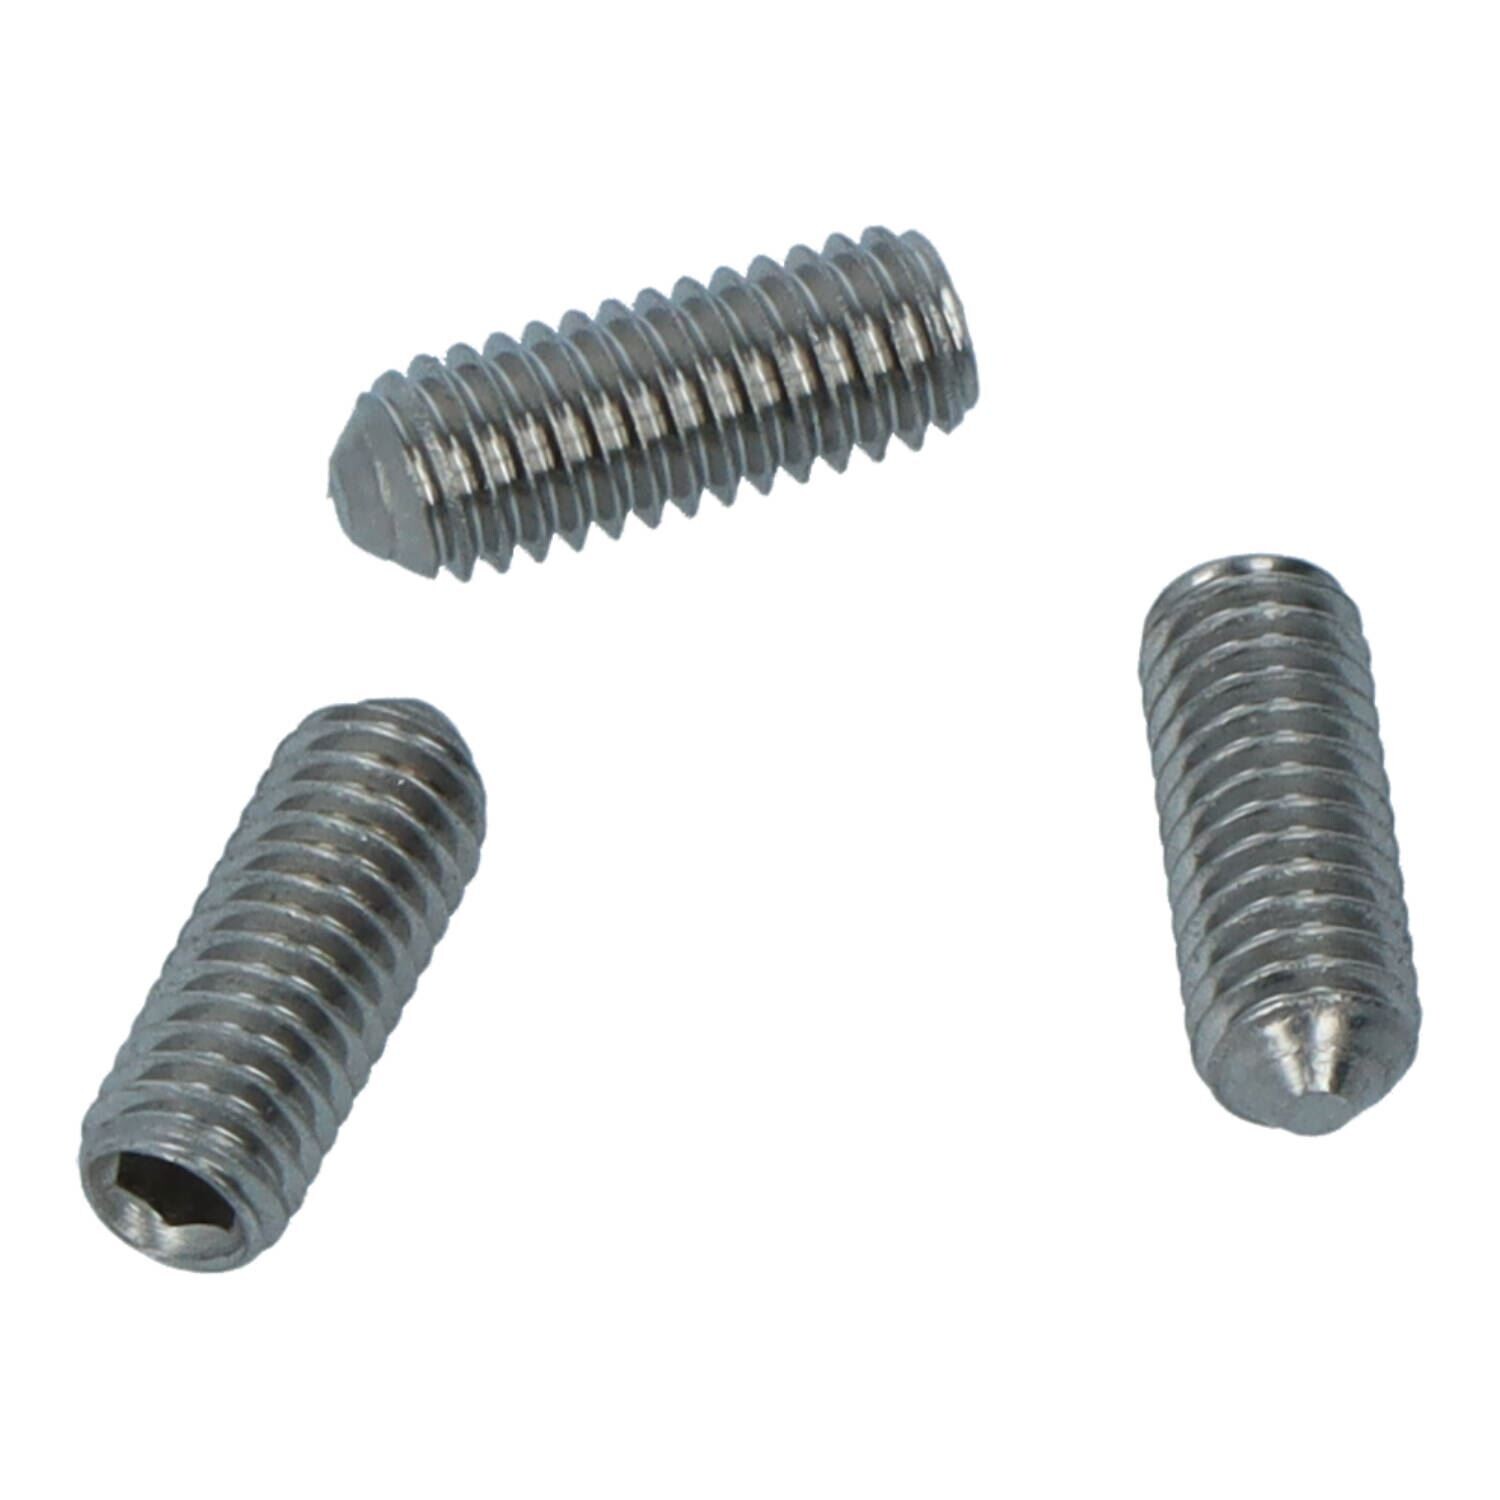 Screw M3 x 8 SETSOC, Cone point, SS